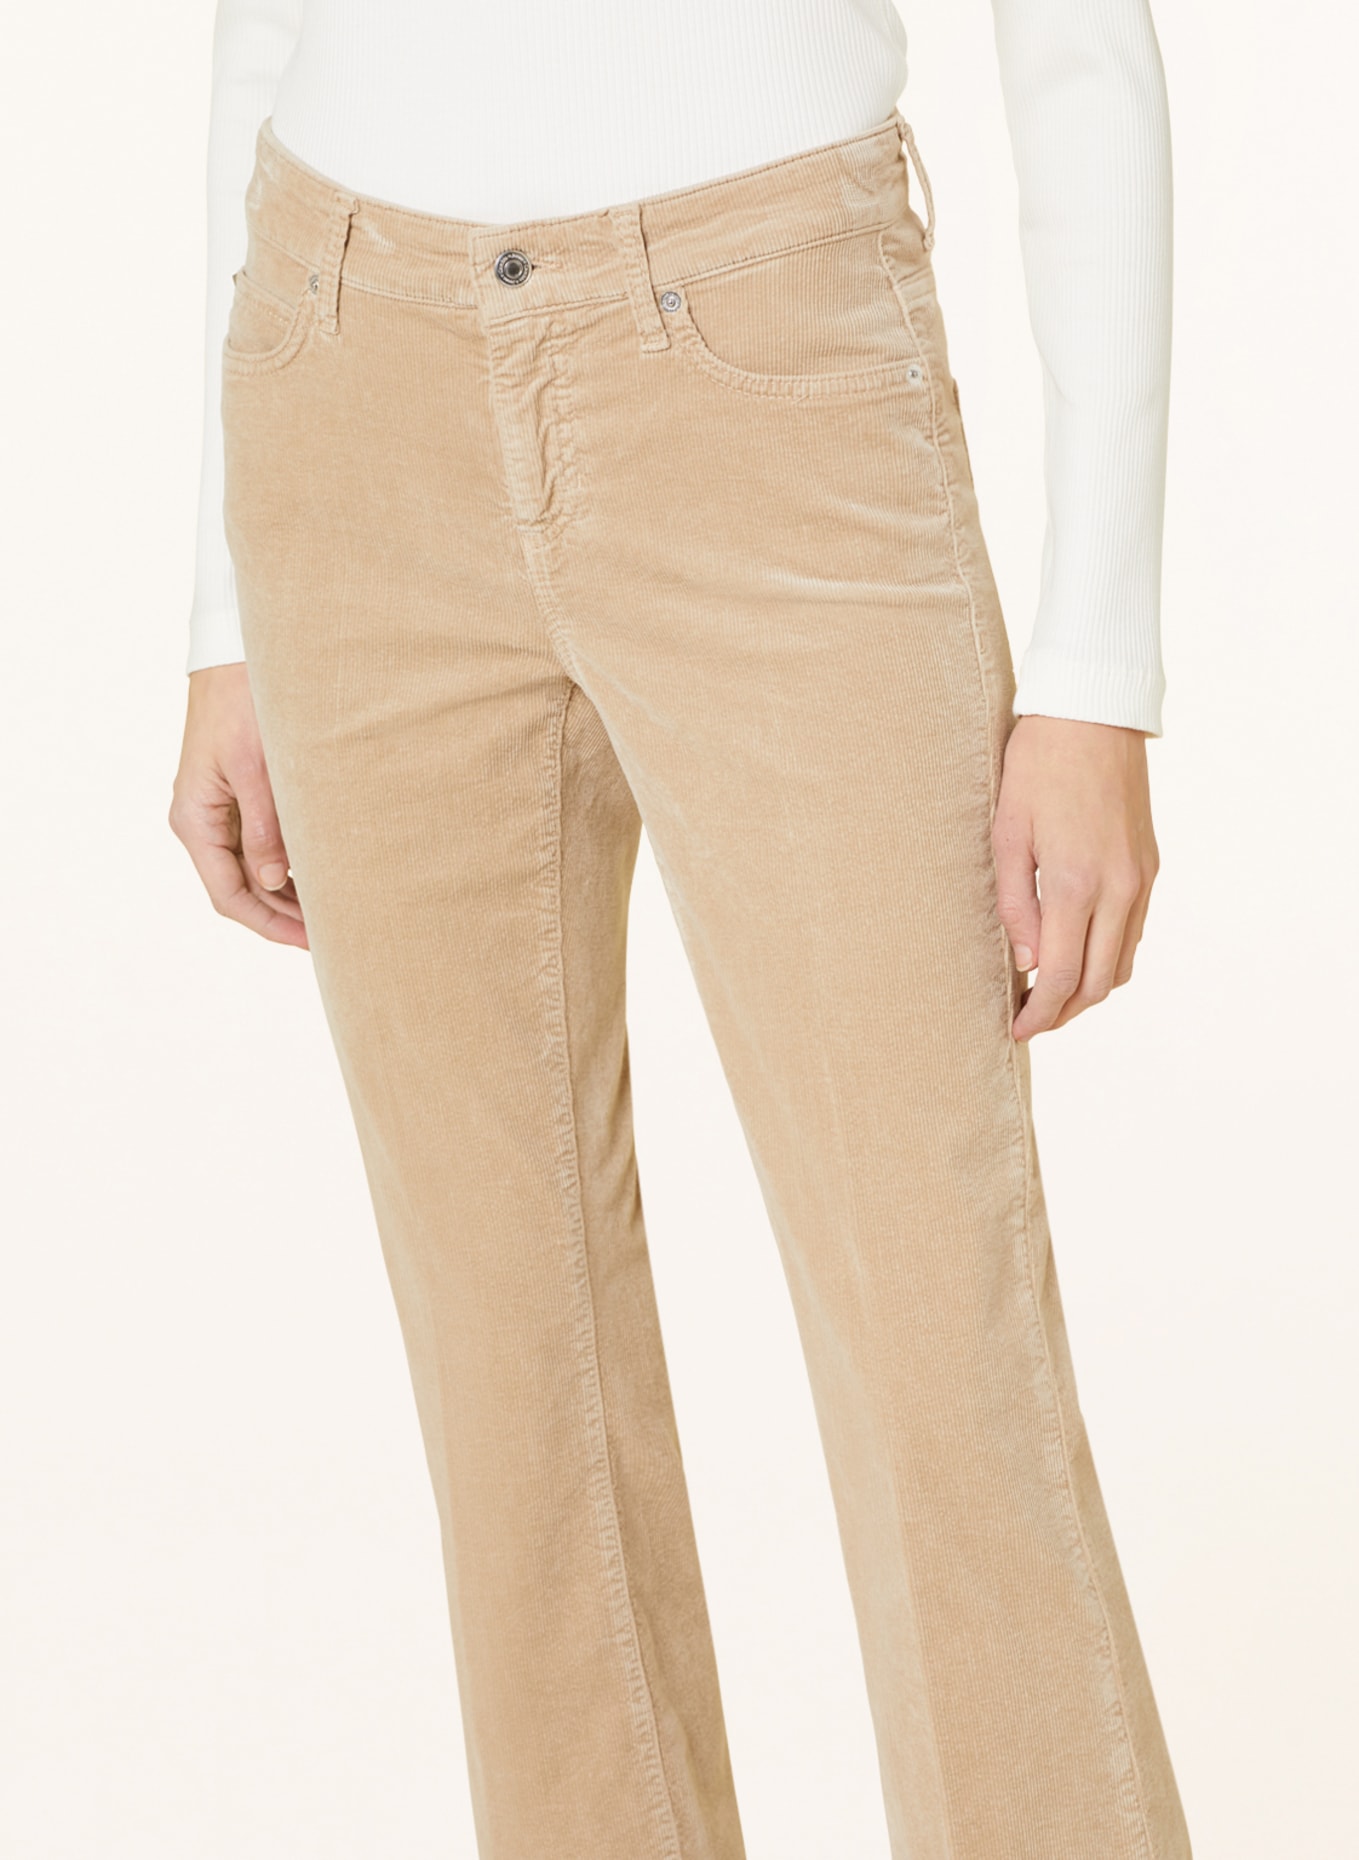 Pieces Tall paperbag waist straight leg cord trousers in cream | ASOS